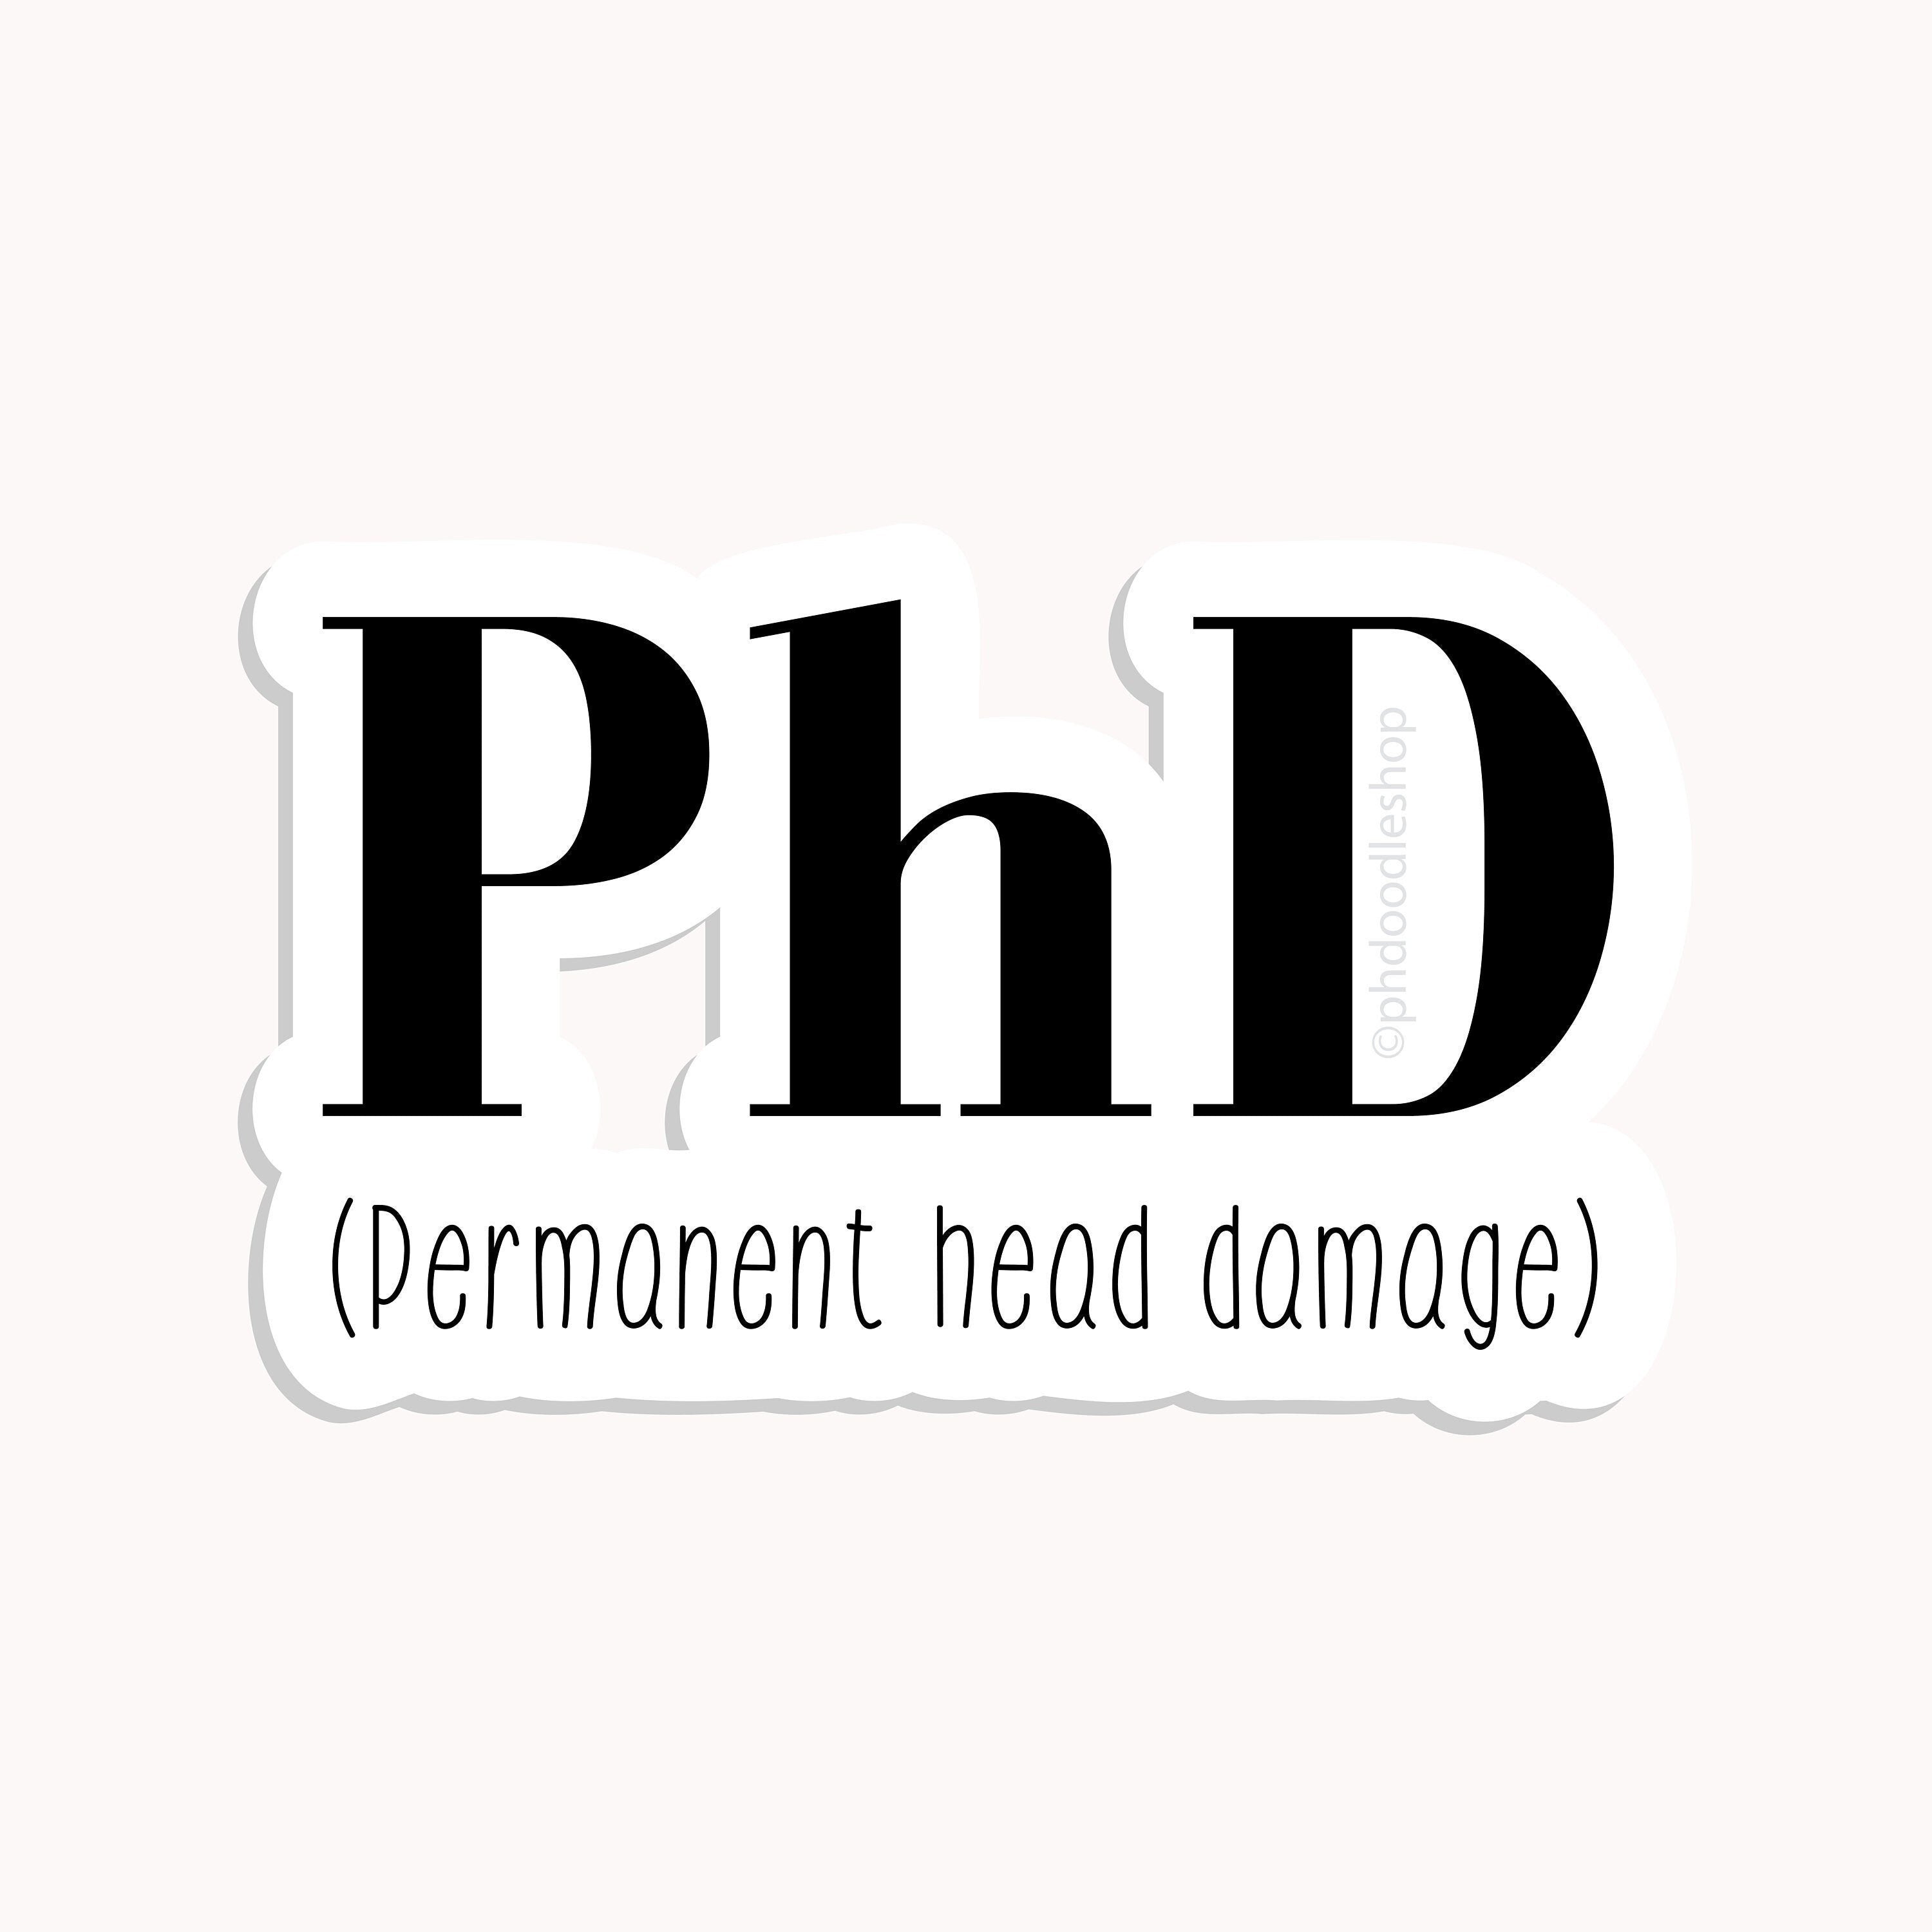 Download Cpt In Phd - One10 Logo PNG Image with No Background - PNGkey.com